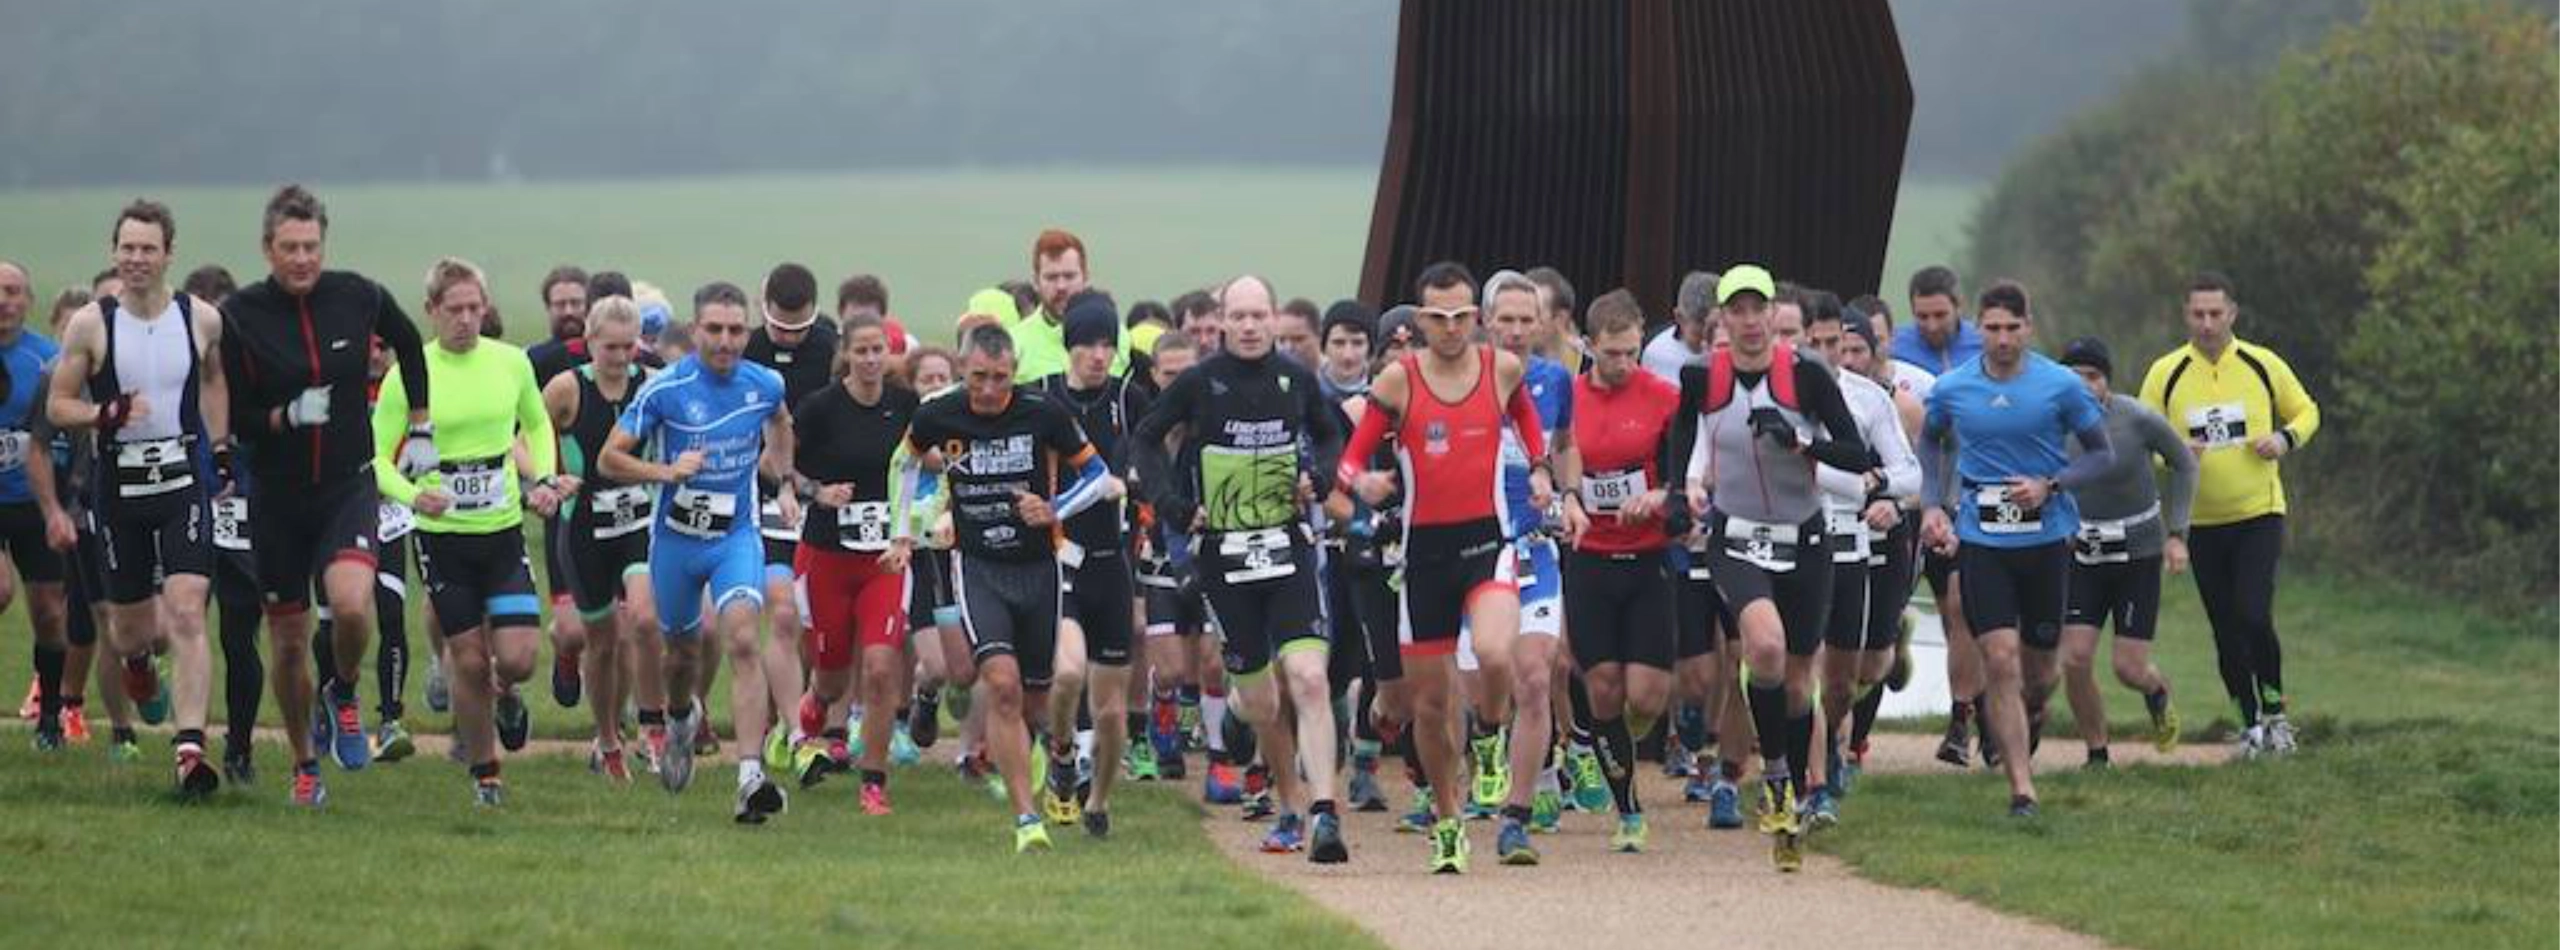 Is the Bison Duathlon the new Ball-Buster?!